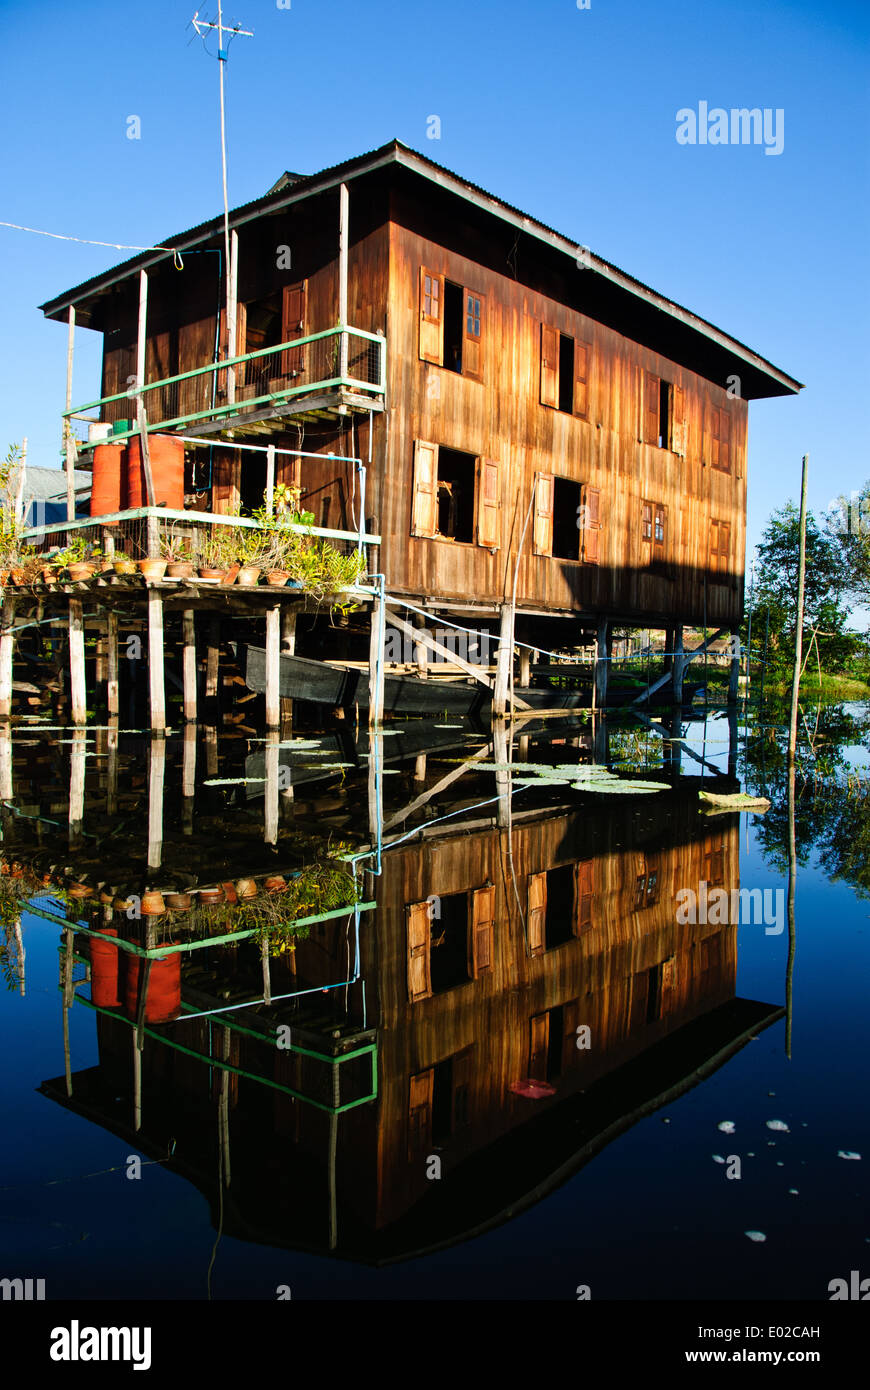 A wooden house built on stilts over the lake of Inle. Stock Photo